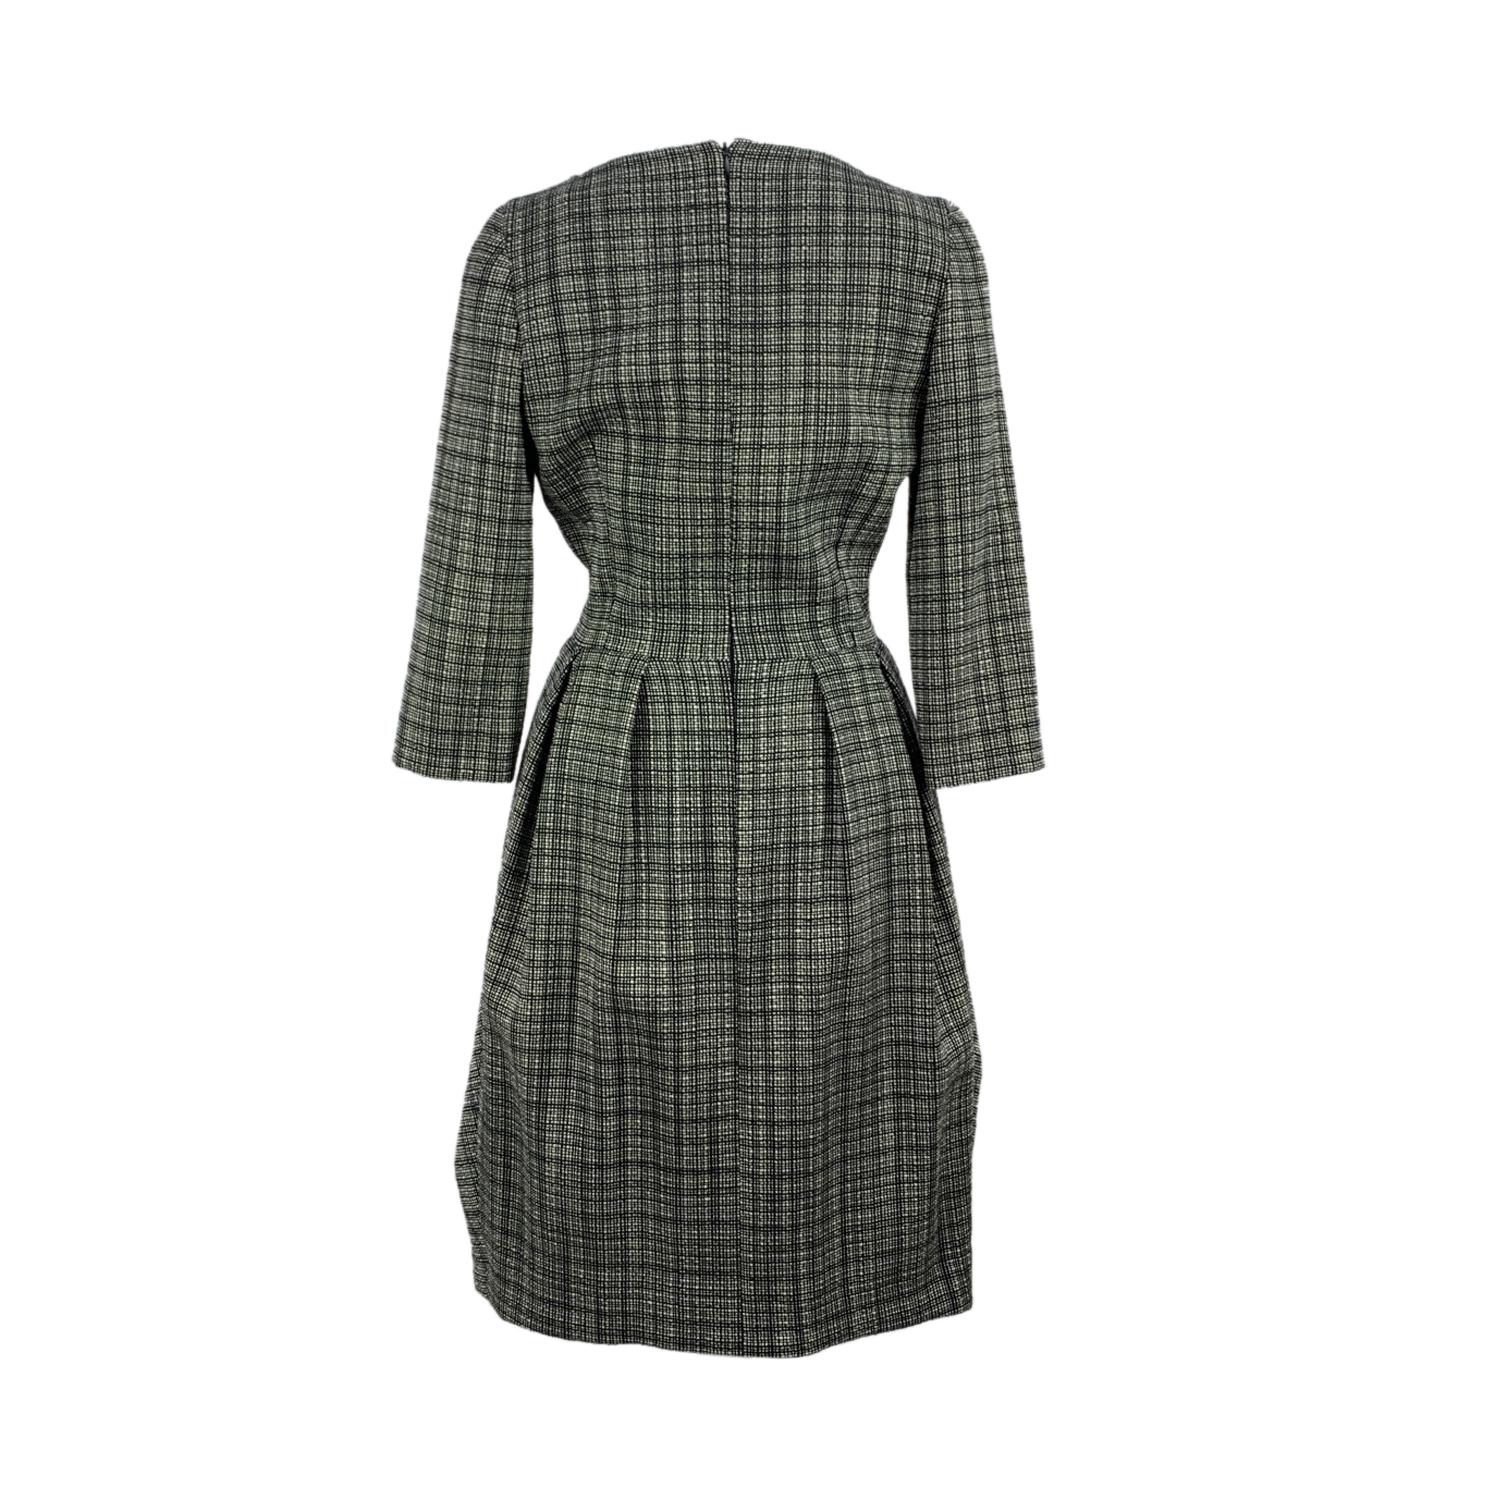 Christian Dior tweed wool dress in black and white colors hat make it look gray. Bow detailing on the front. Boat neckline and half-length sleeves. Knee length. Silk lining. Rear zip closure. Size: 40 FR, 12 GB, 44 IT, 38 D, 8 USA (it should